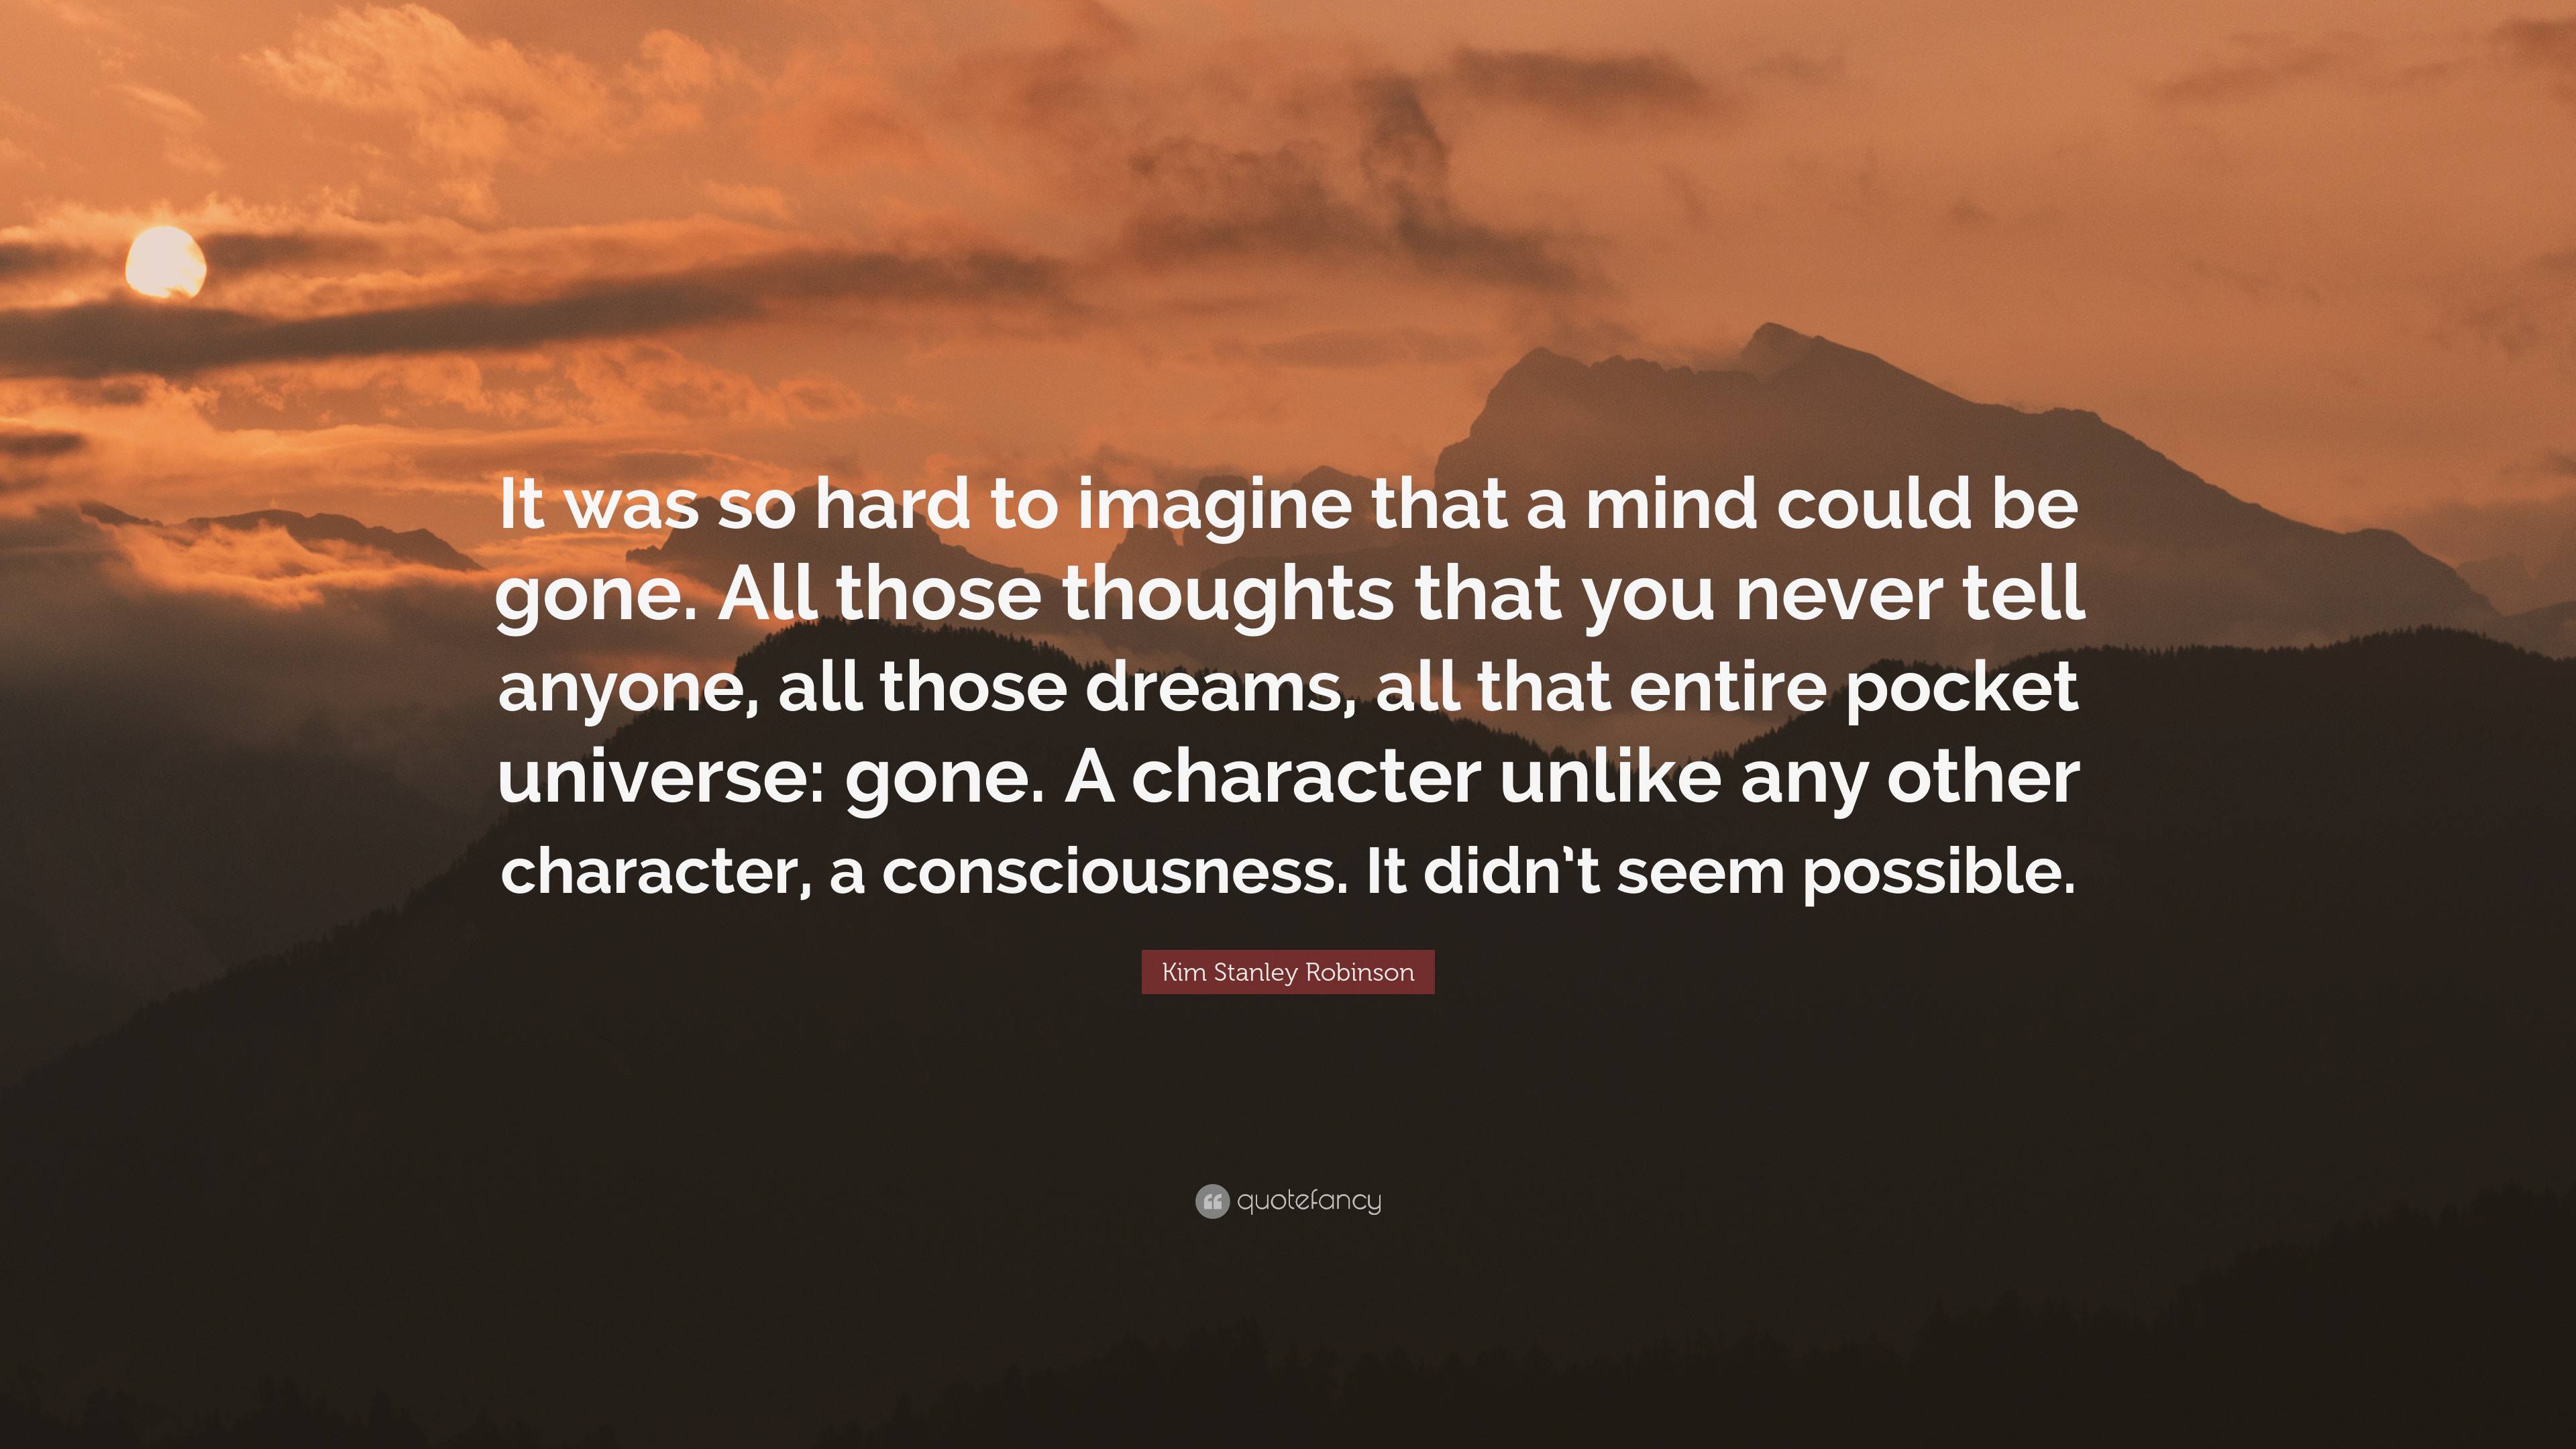 Kim Stanley Robinson Quote “it Was So Hard To Imagine That A Mind Could Be Gone All Those 